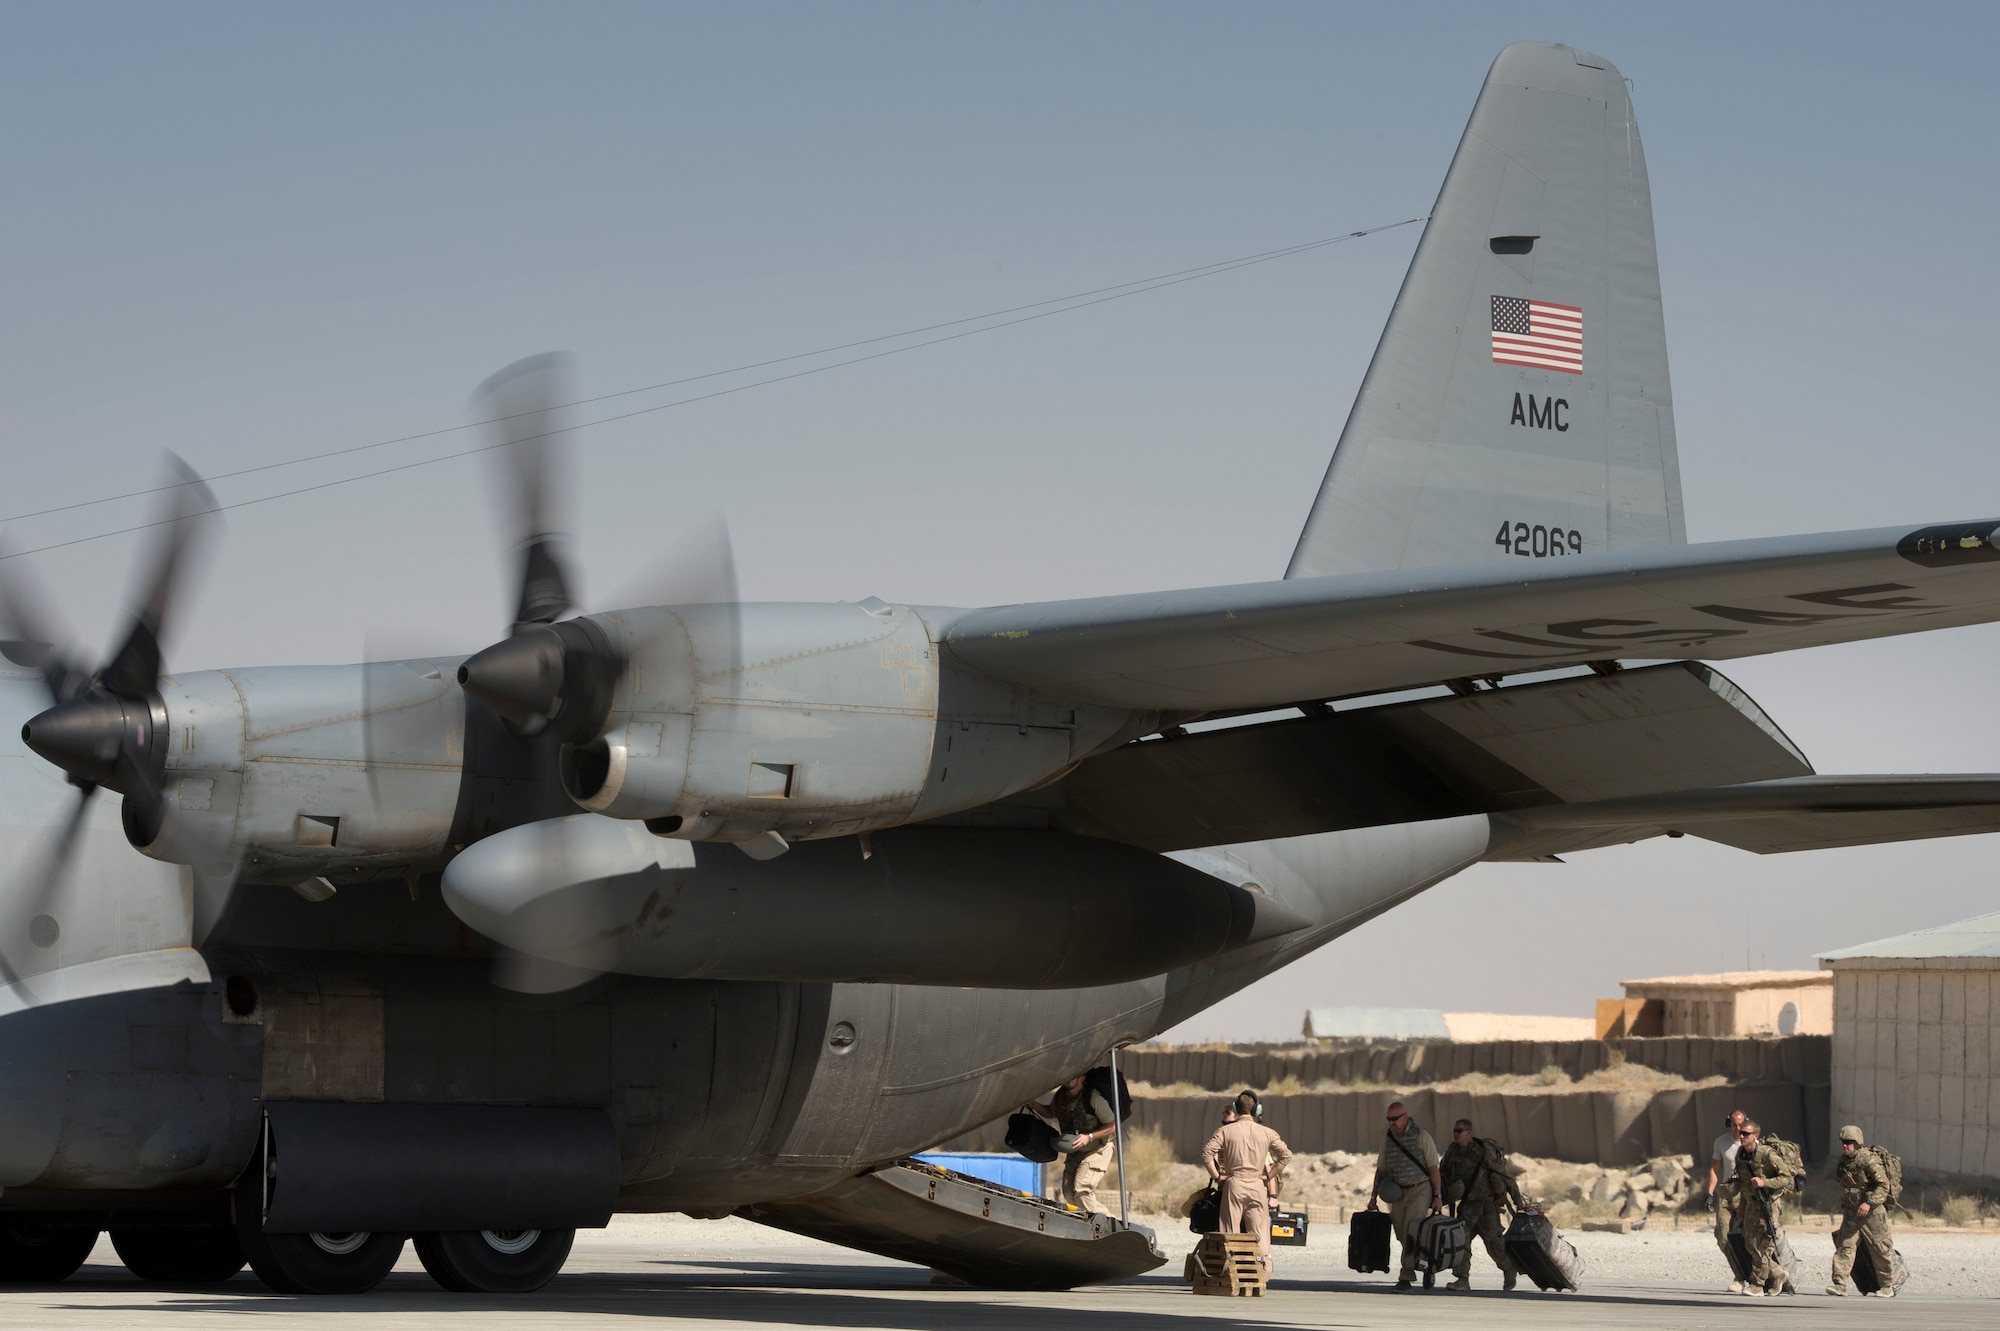 A number of final Department of Defense and military passengers board a 774th Expeditionary Airlift Squadron C-130 Hercules at Forward Operating Base Sharana, Paktika province, Afghanistan, Sept. 28, 2013. This mission marked a retrograde milestone as the 774th EAS transported the last cargo from FOB Sharana before the base is transferred to the Afghan Ministry of Defense. 